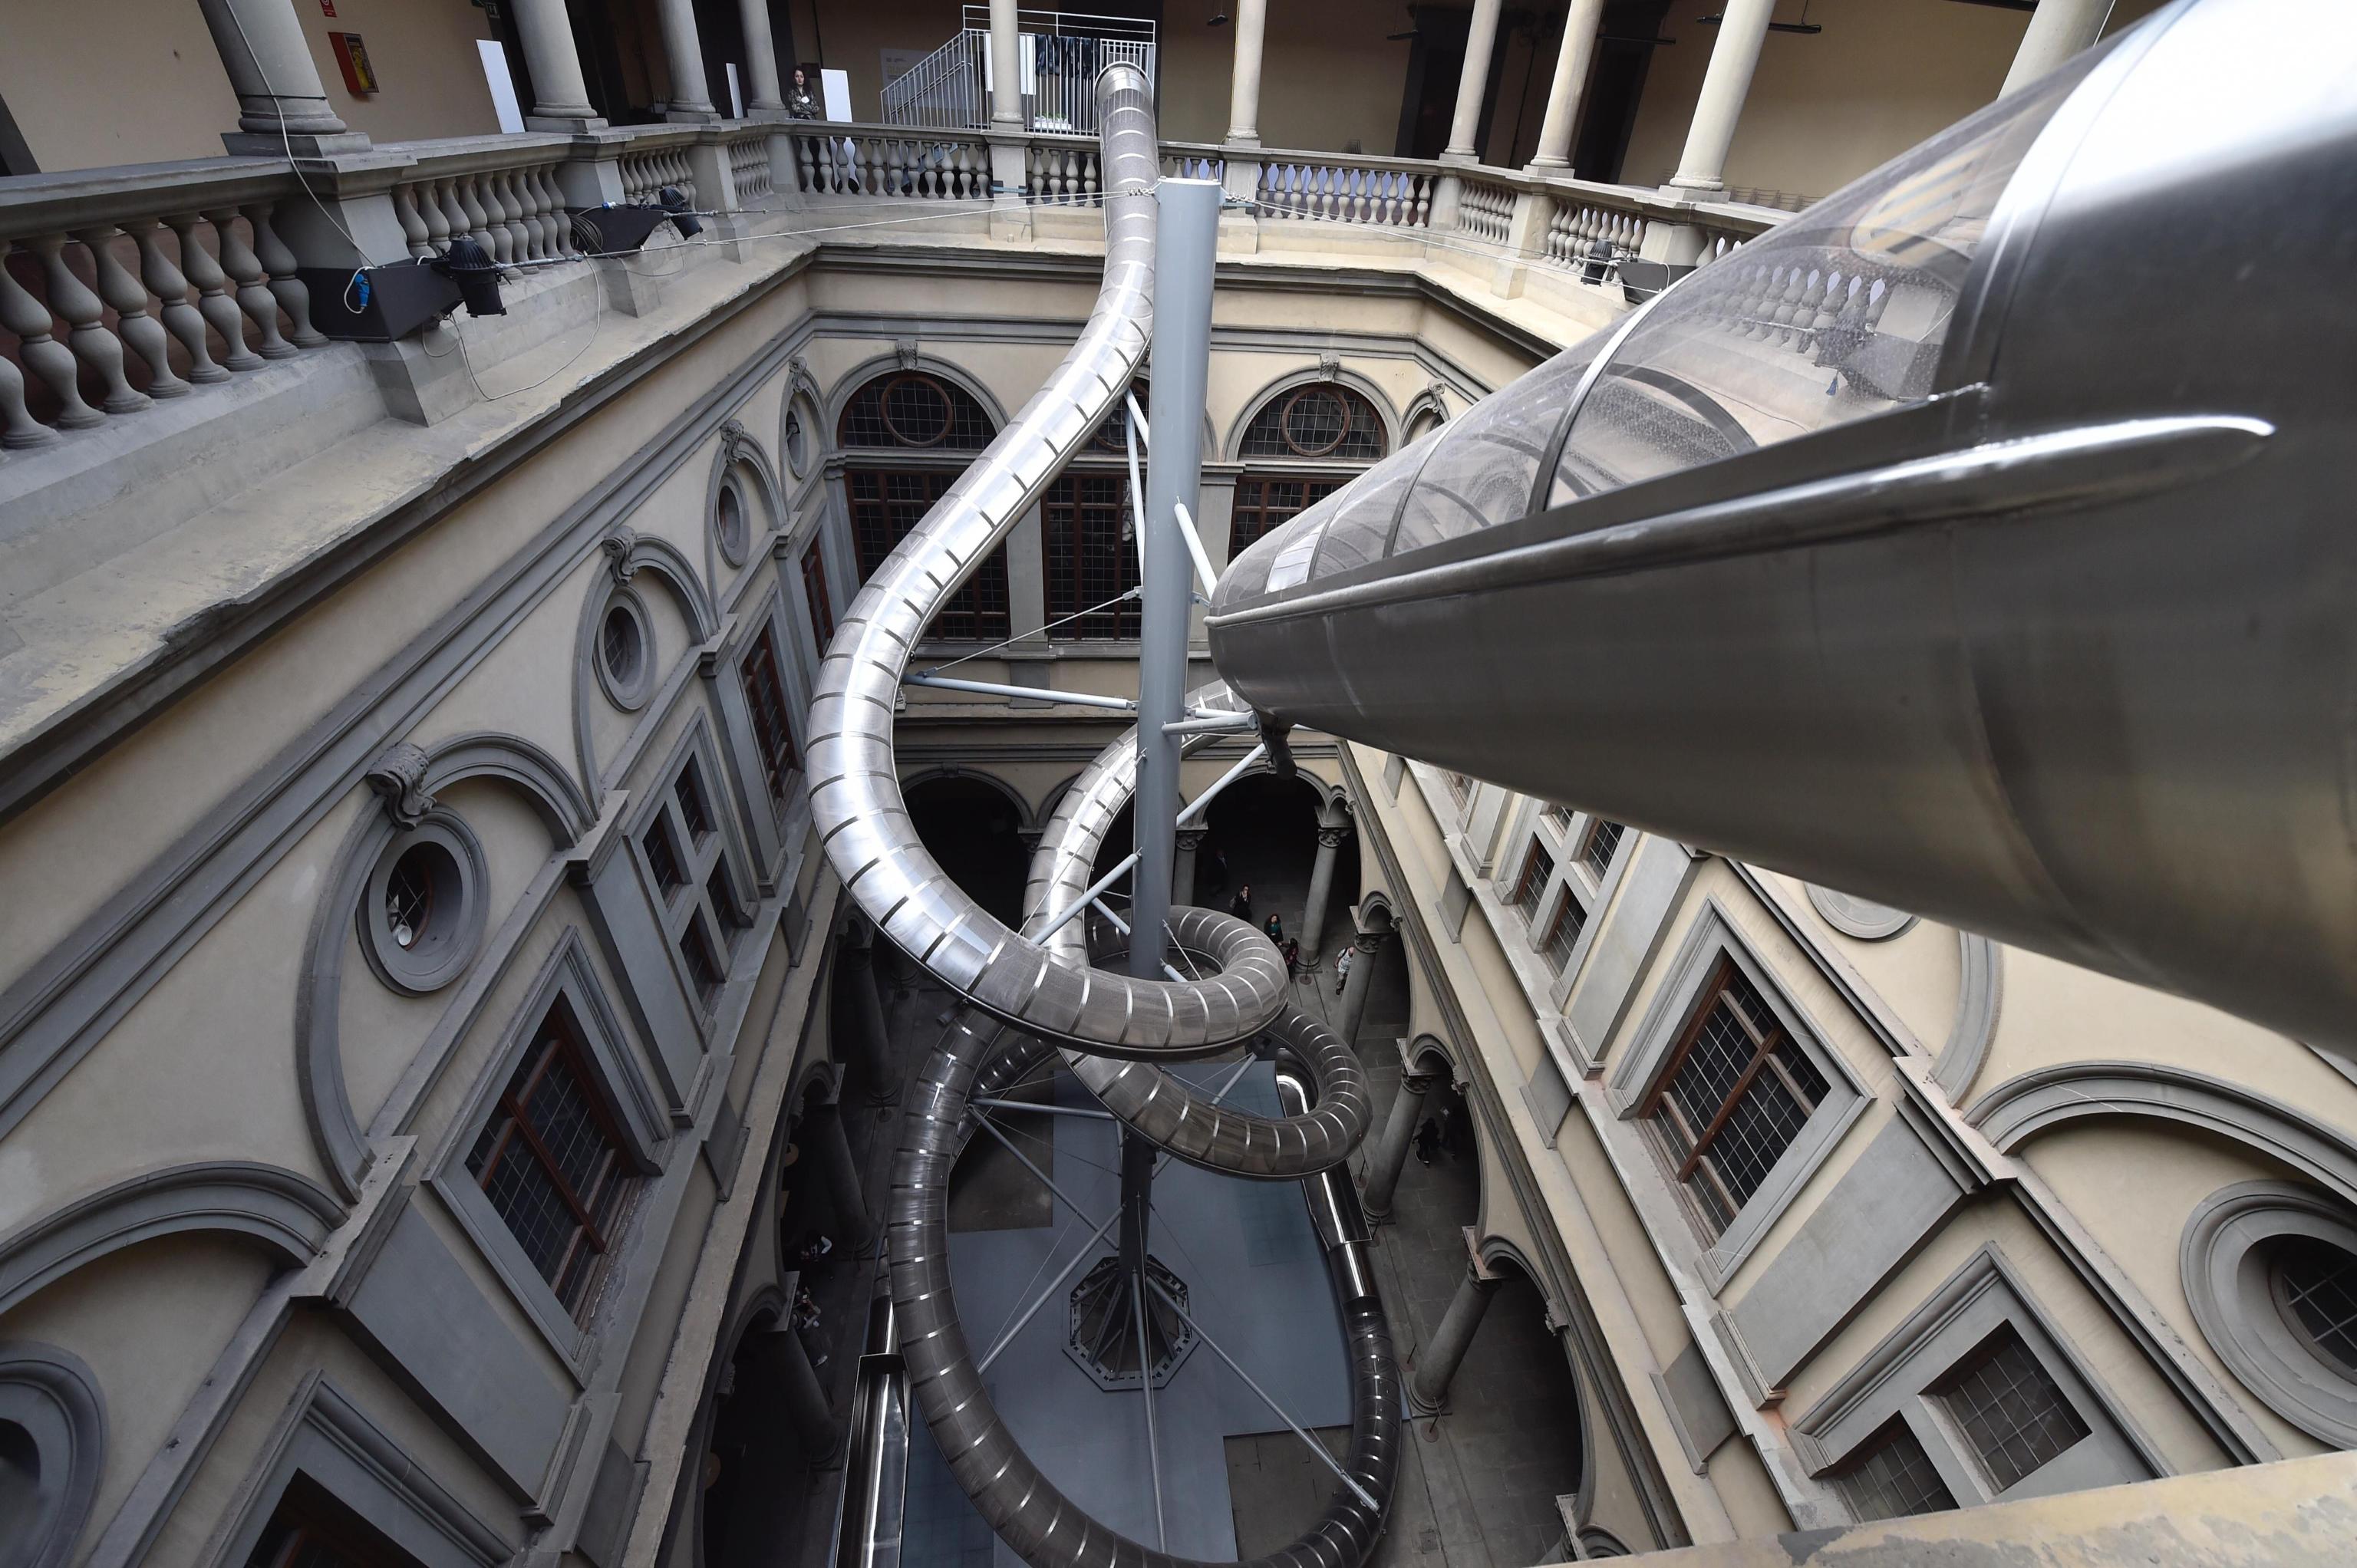 The structure 'The Florence Experiment' on display at Palazzo Strozzi in Florence, Italy, 17 April 2018. 'The Florence Experiment', running from 19 April to 26 August 2018, is an innovative research project carried out by German artist Carsten Höller and Italian plant neurobiologist Stefano Mancuso. Visitors will have the chance to slide down the structure from a height of 20 metres. Their emotional reactions will be recorded and compared with those of plants to examine the empathetic possibilities between humans and plant organisms. ANSA/ MAURIZIO DEGL' INNOCENTI